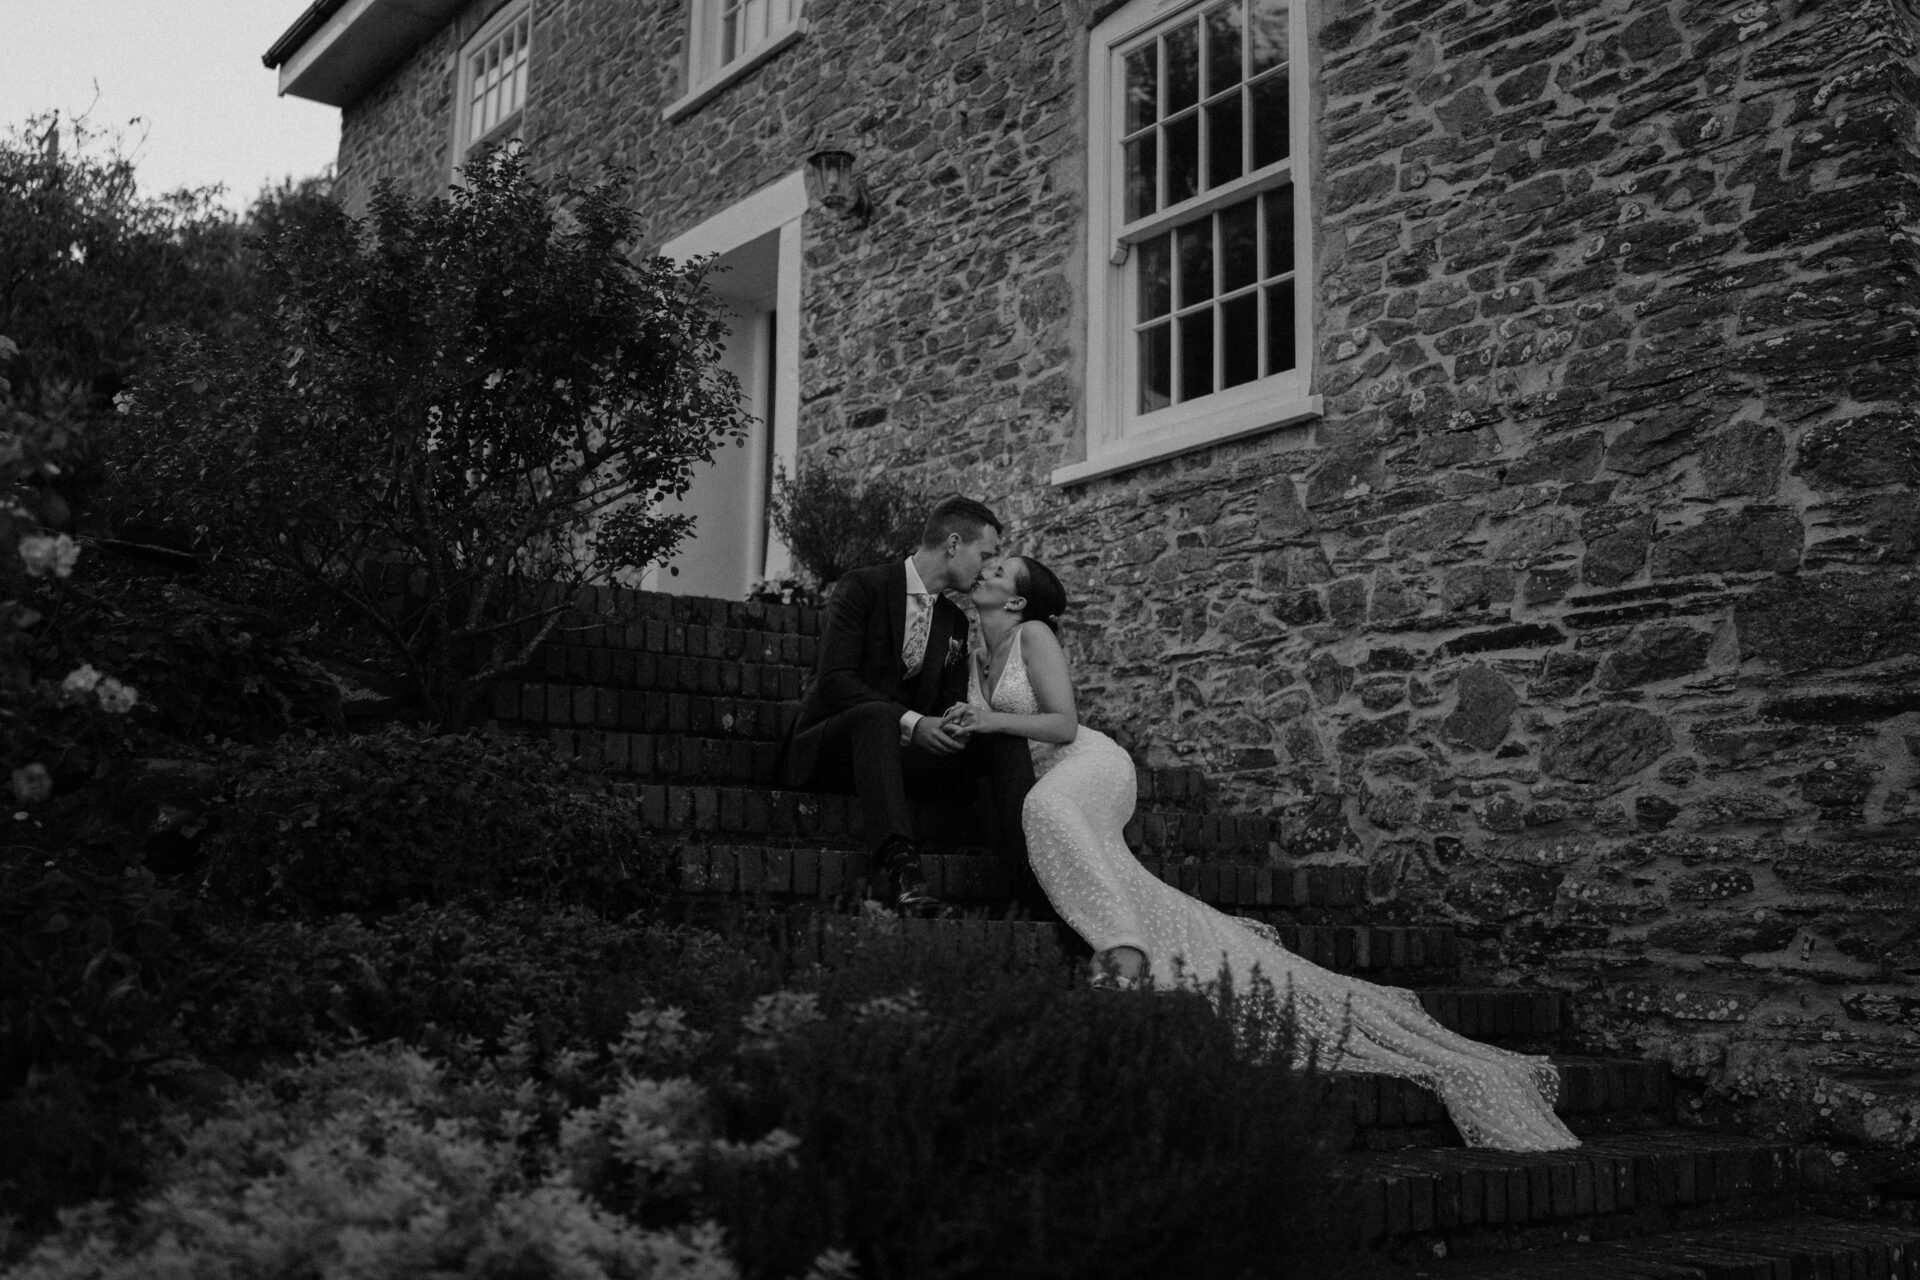 A bride and groom sitting on steps in front of a stone house.